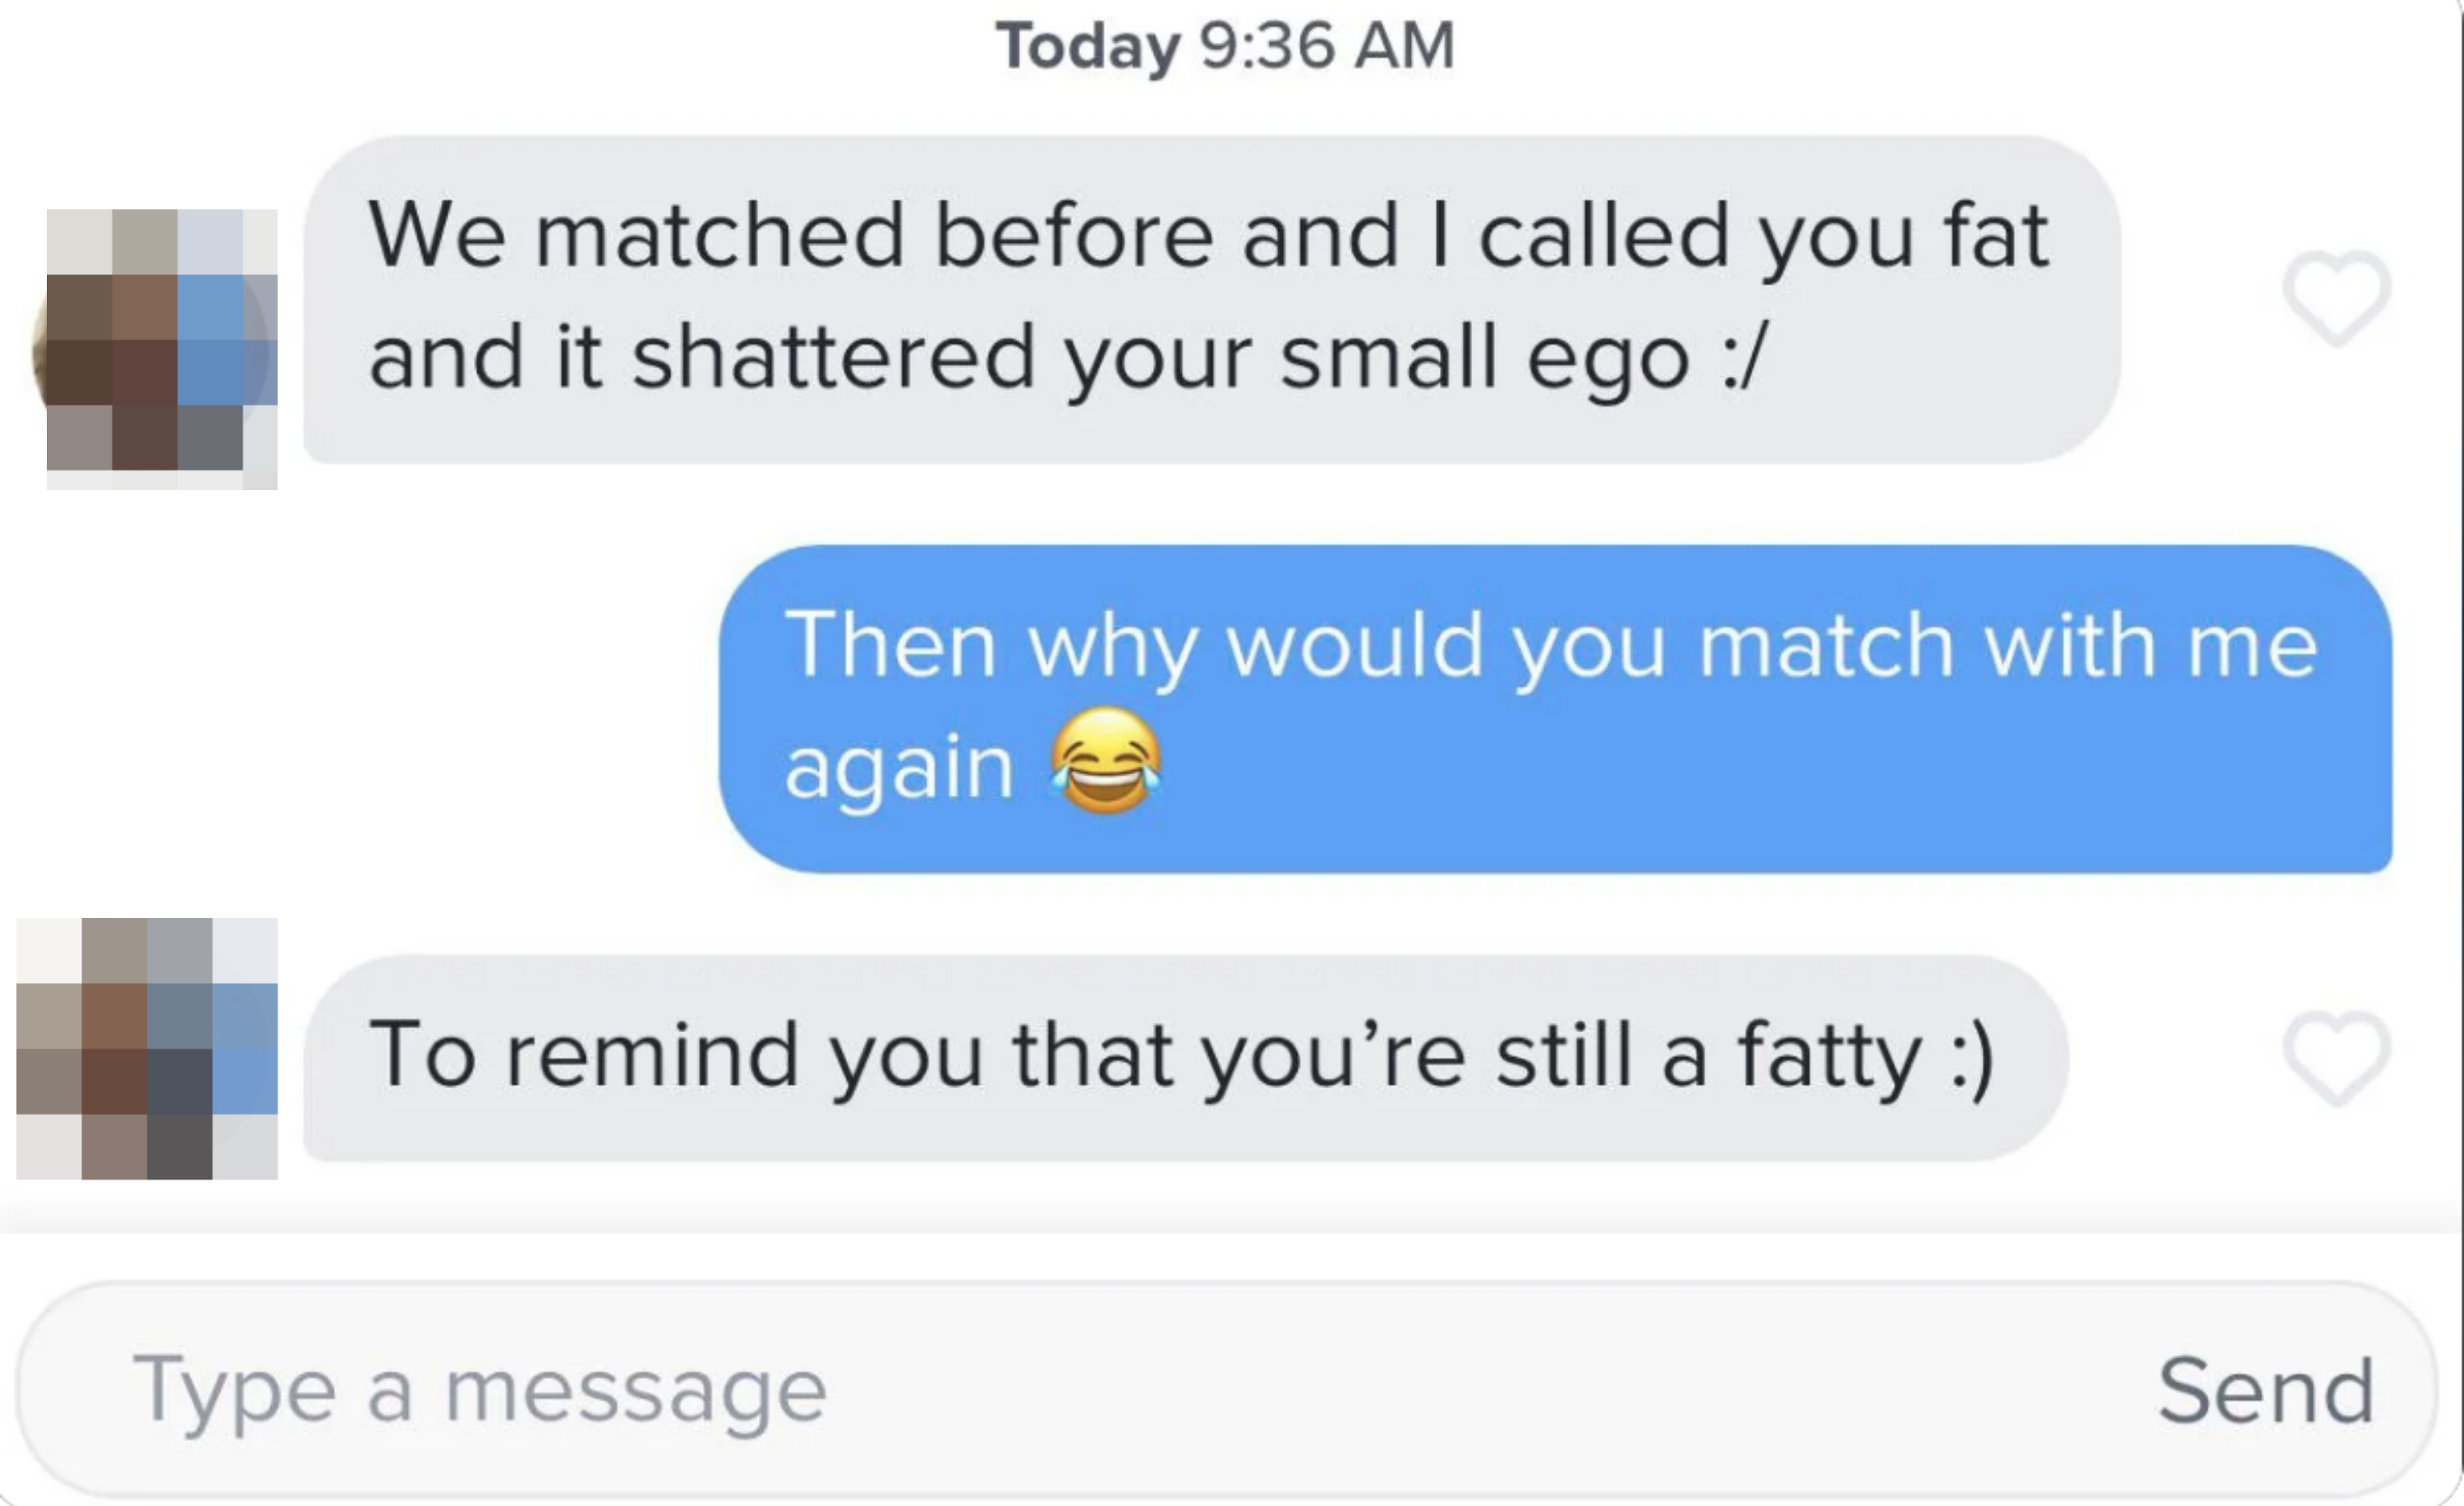 someone saying they matched with the person again just to remind them they&#x27;re still a fatty